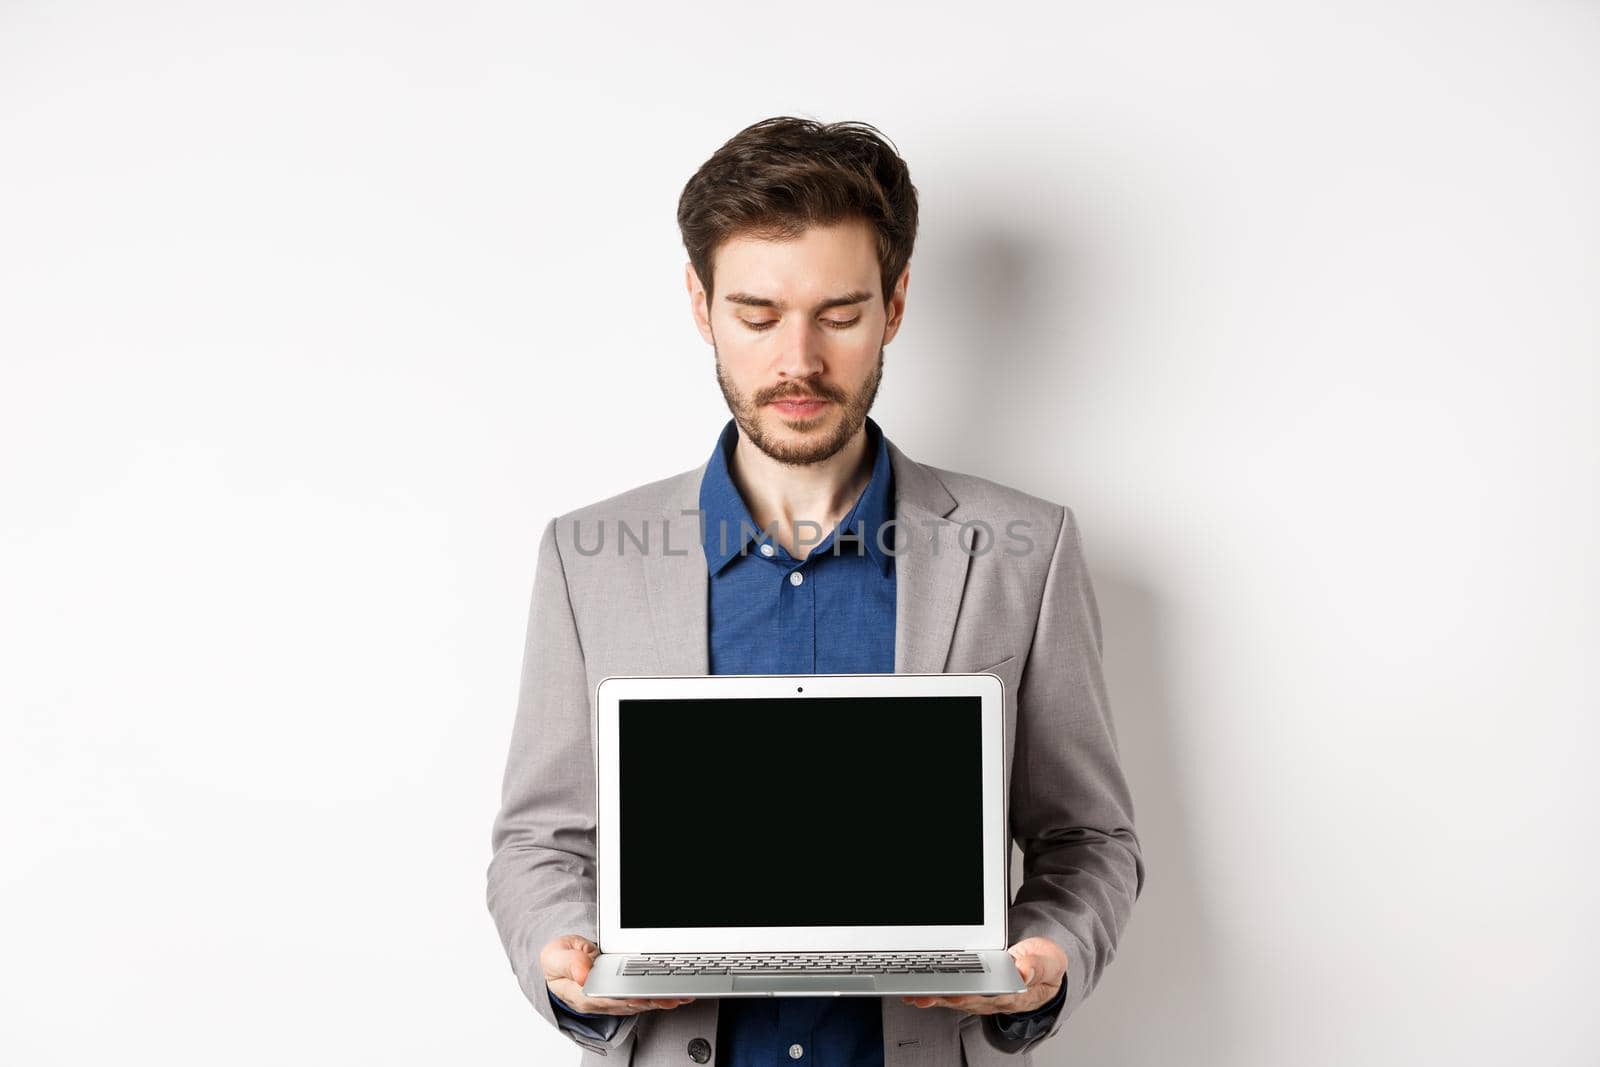 Handsome caucasian businessman in suit showing empty laptop screen, demonstrate promo, standing on white background.